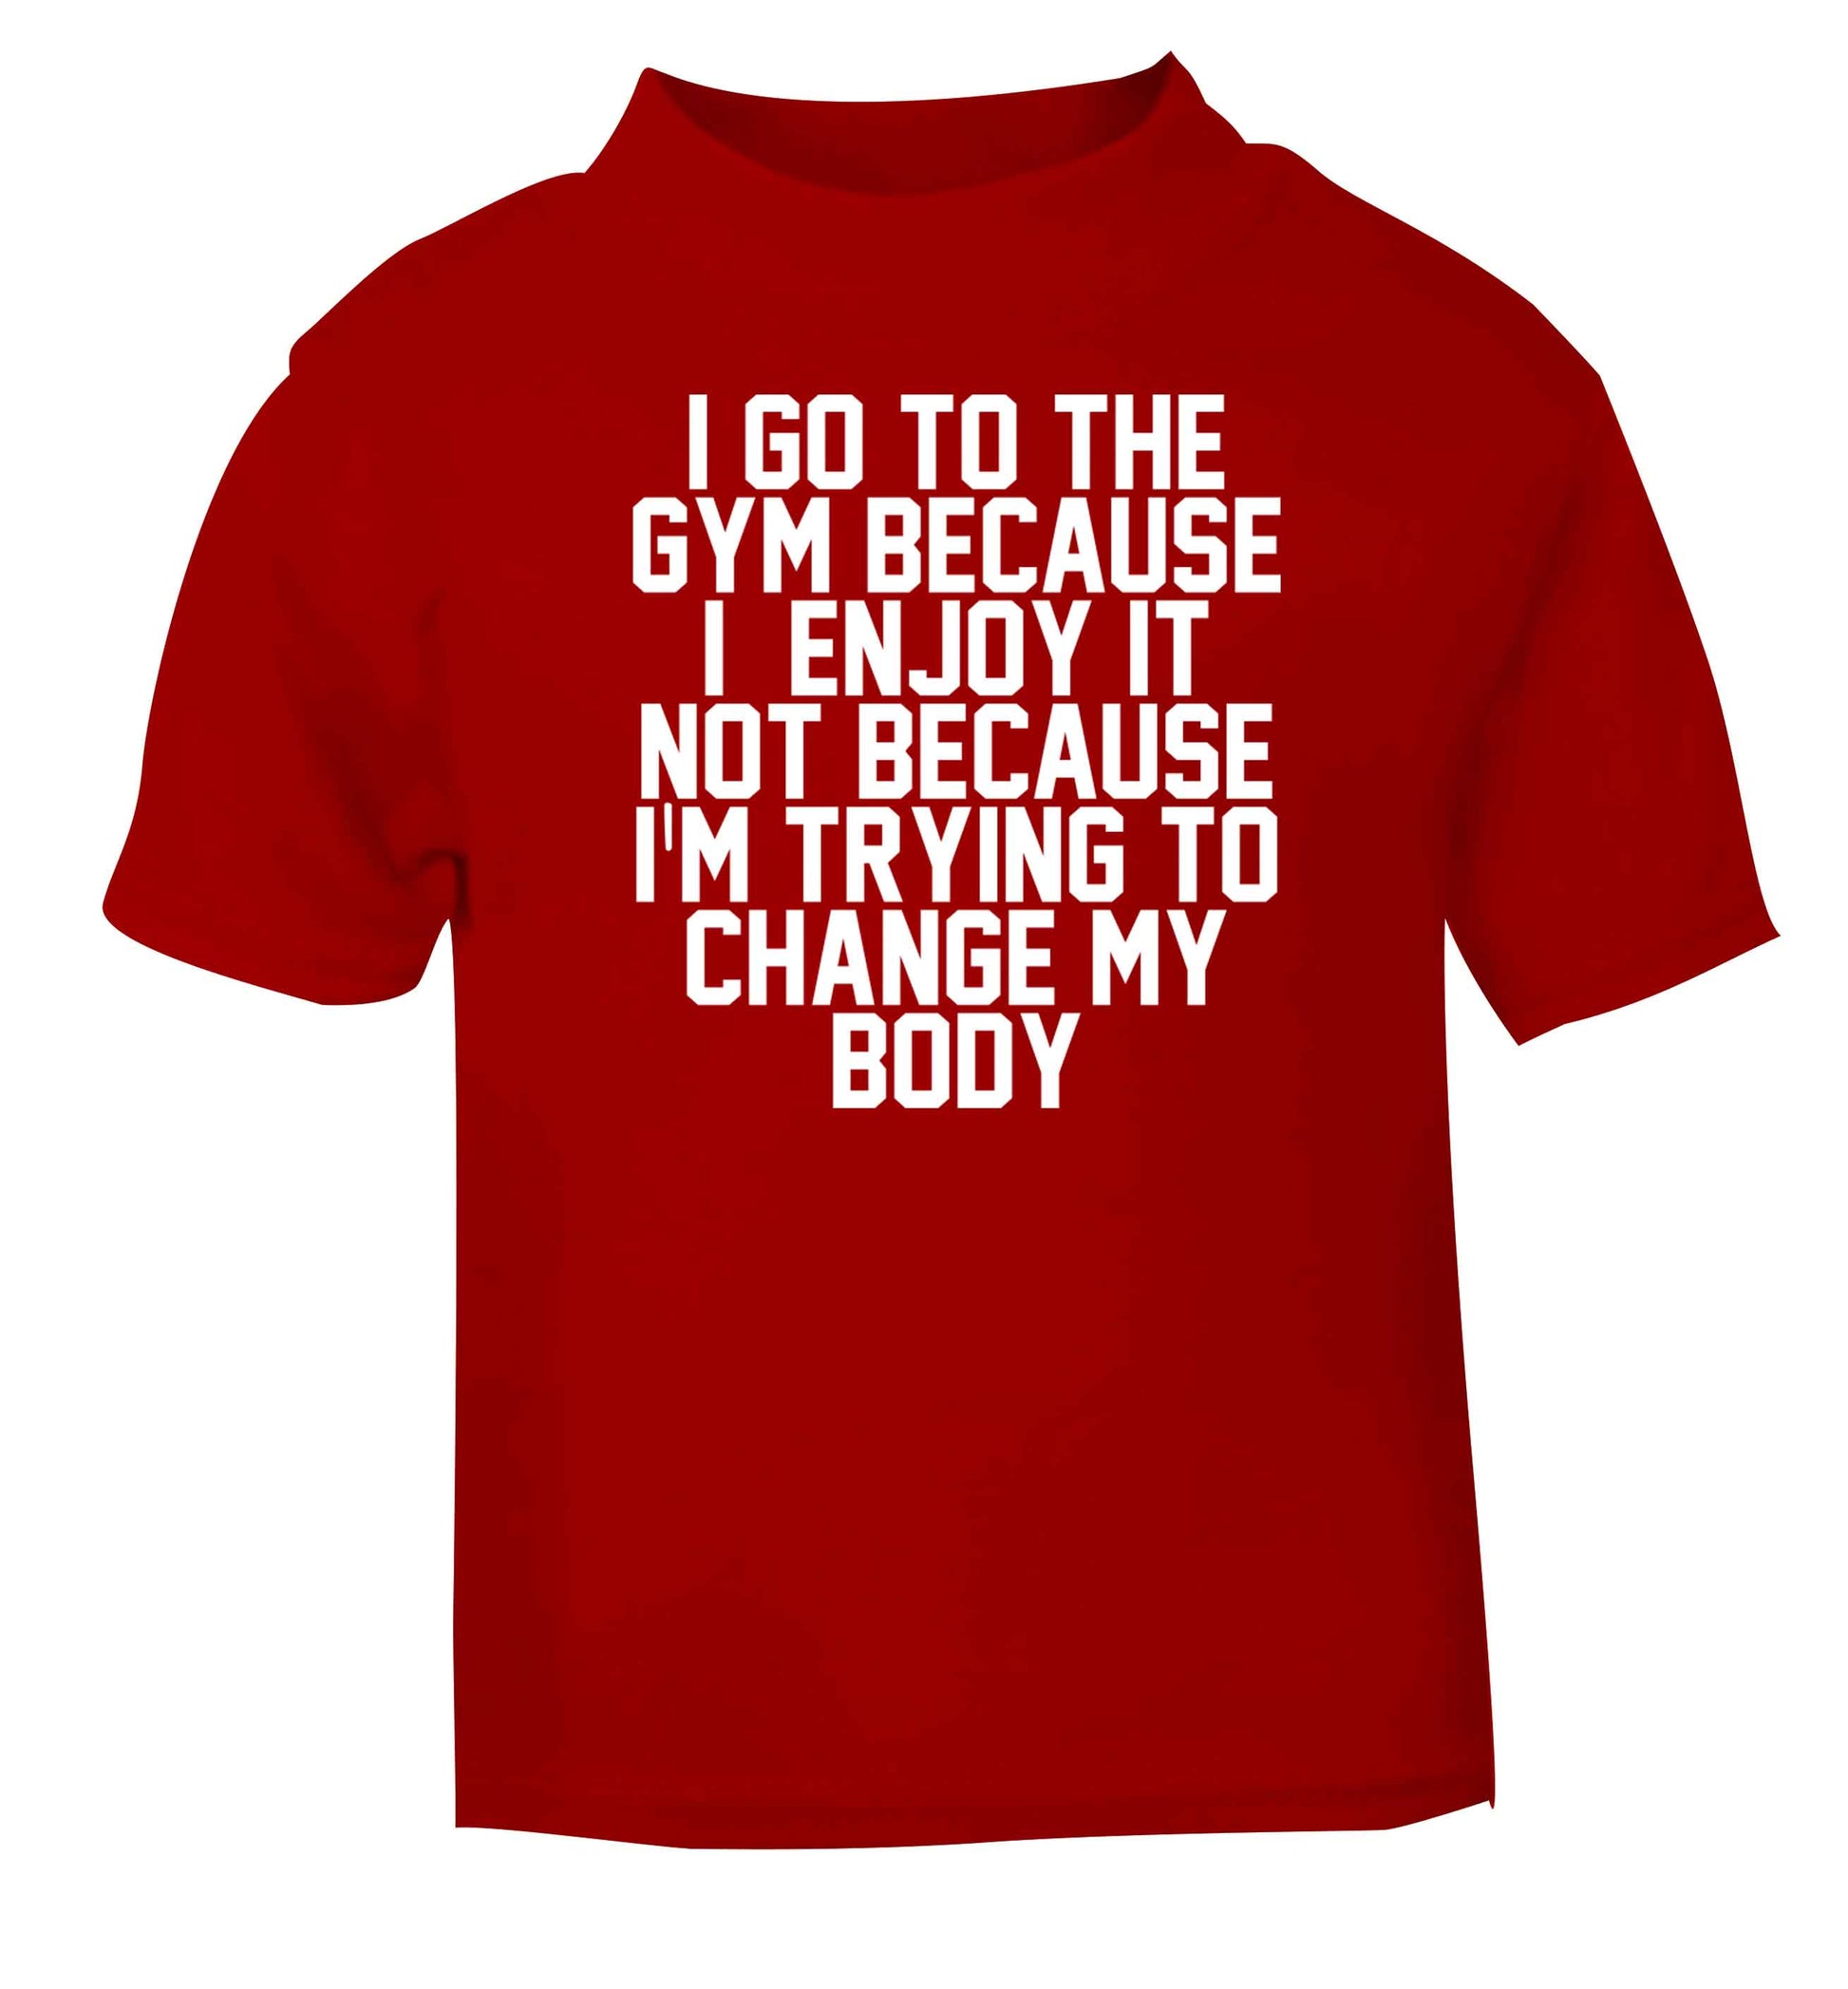 I go to the gym because I enjoy it not because I'm trying to change my body red baby toddler Tshirt 2 Years